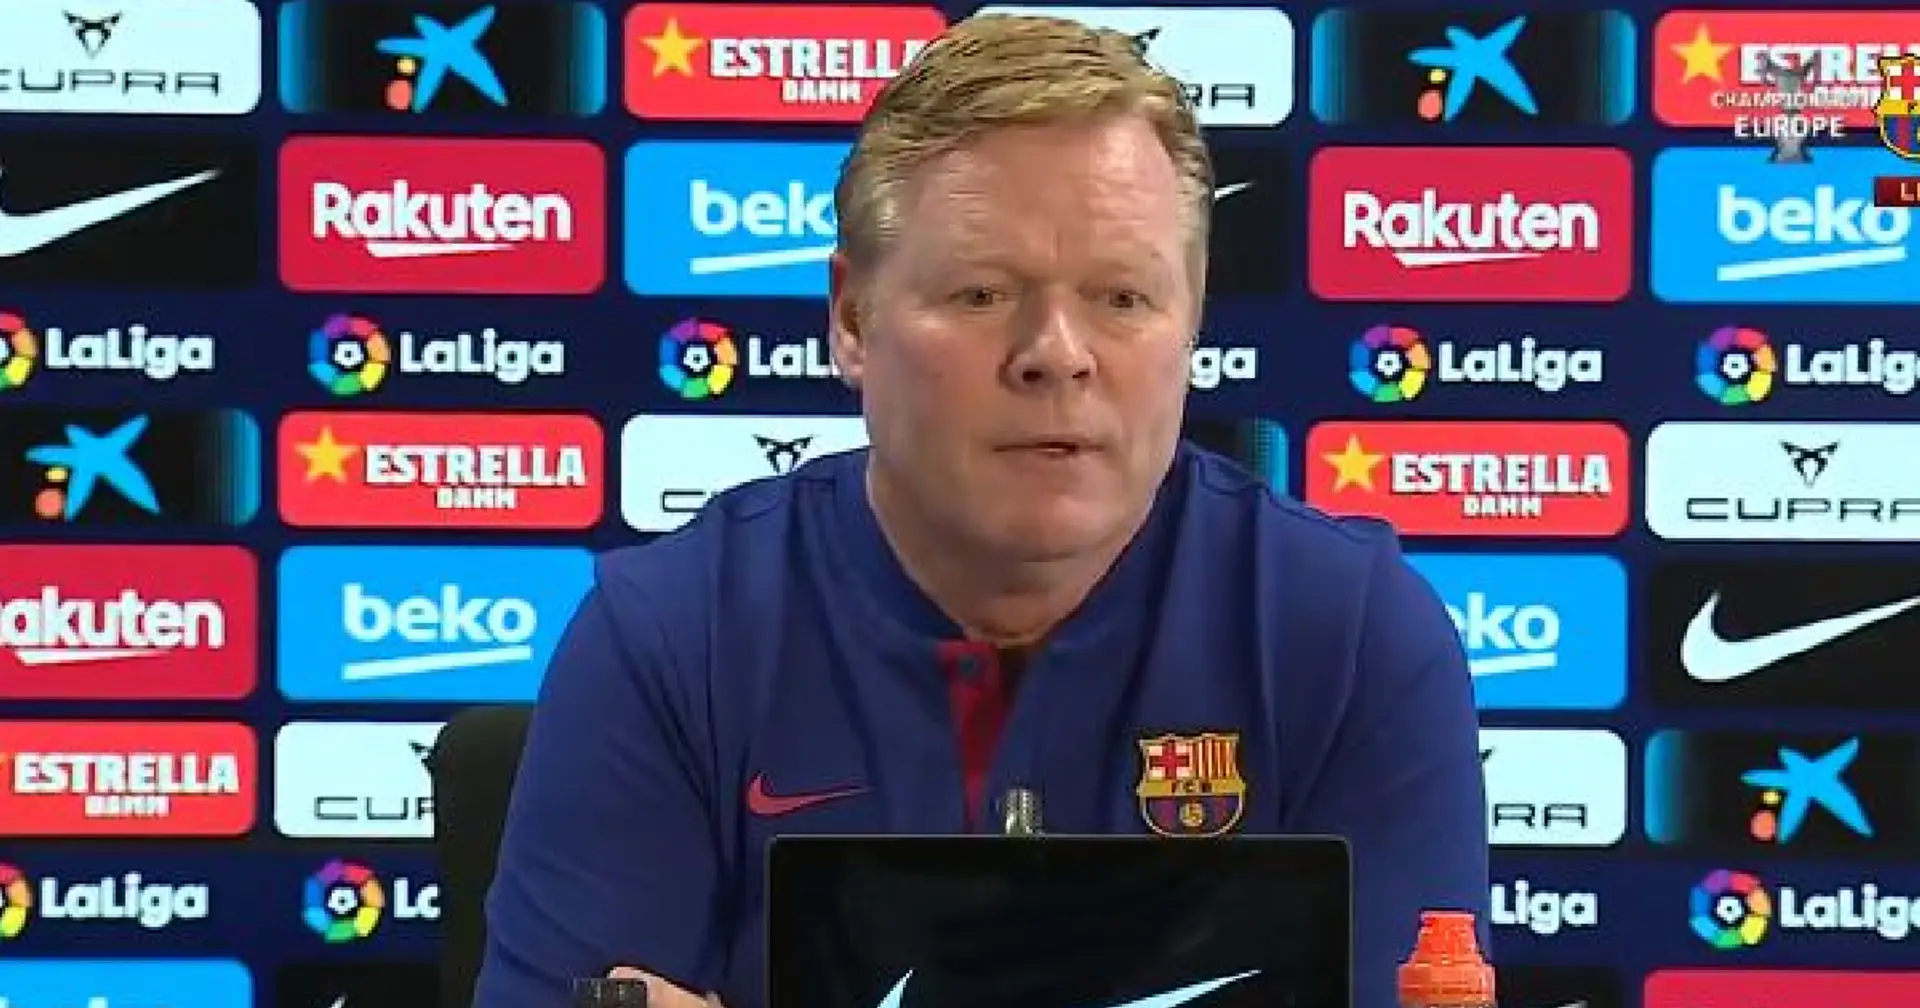 Koeman confirms 'changes will be made', claims he loves Barca